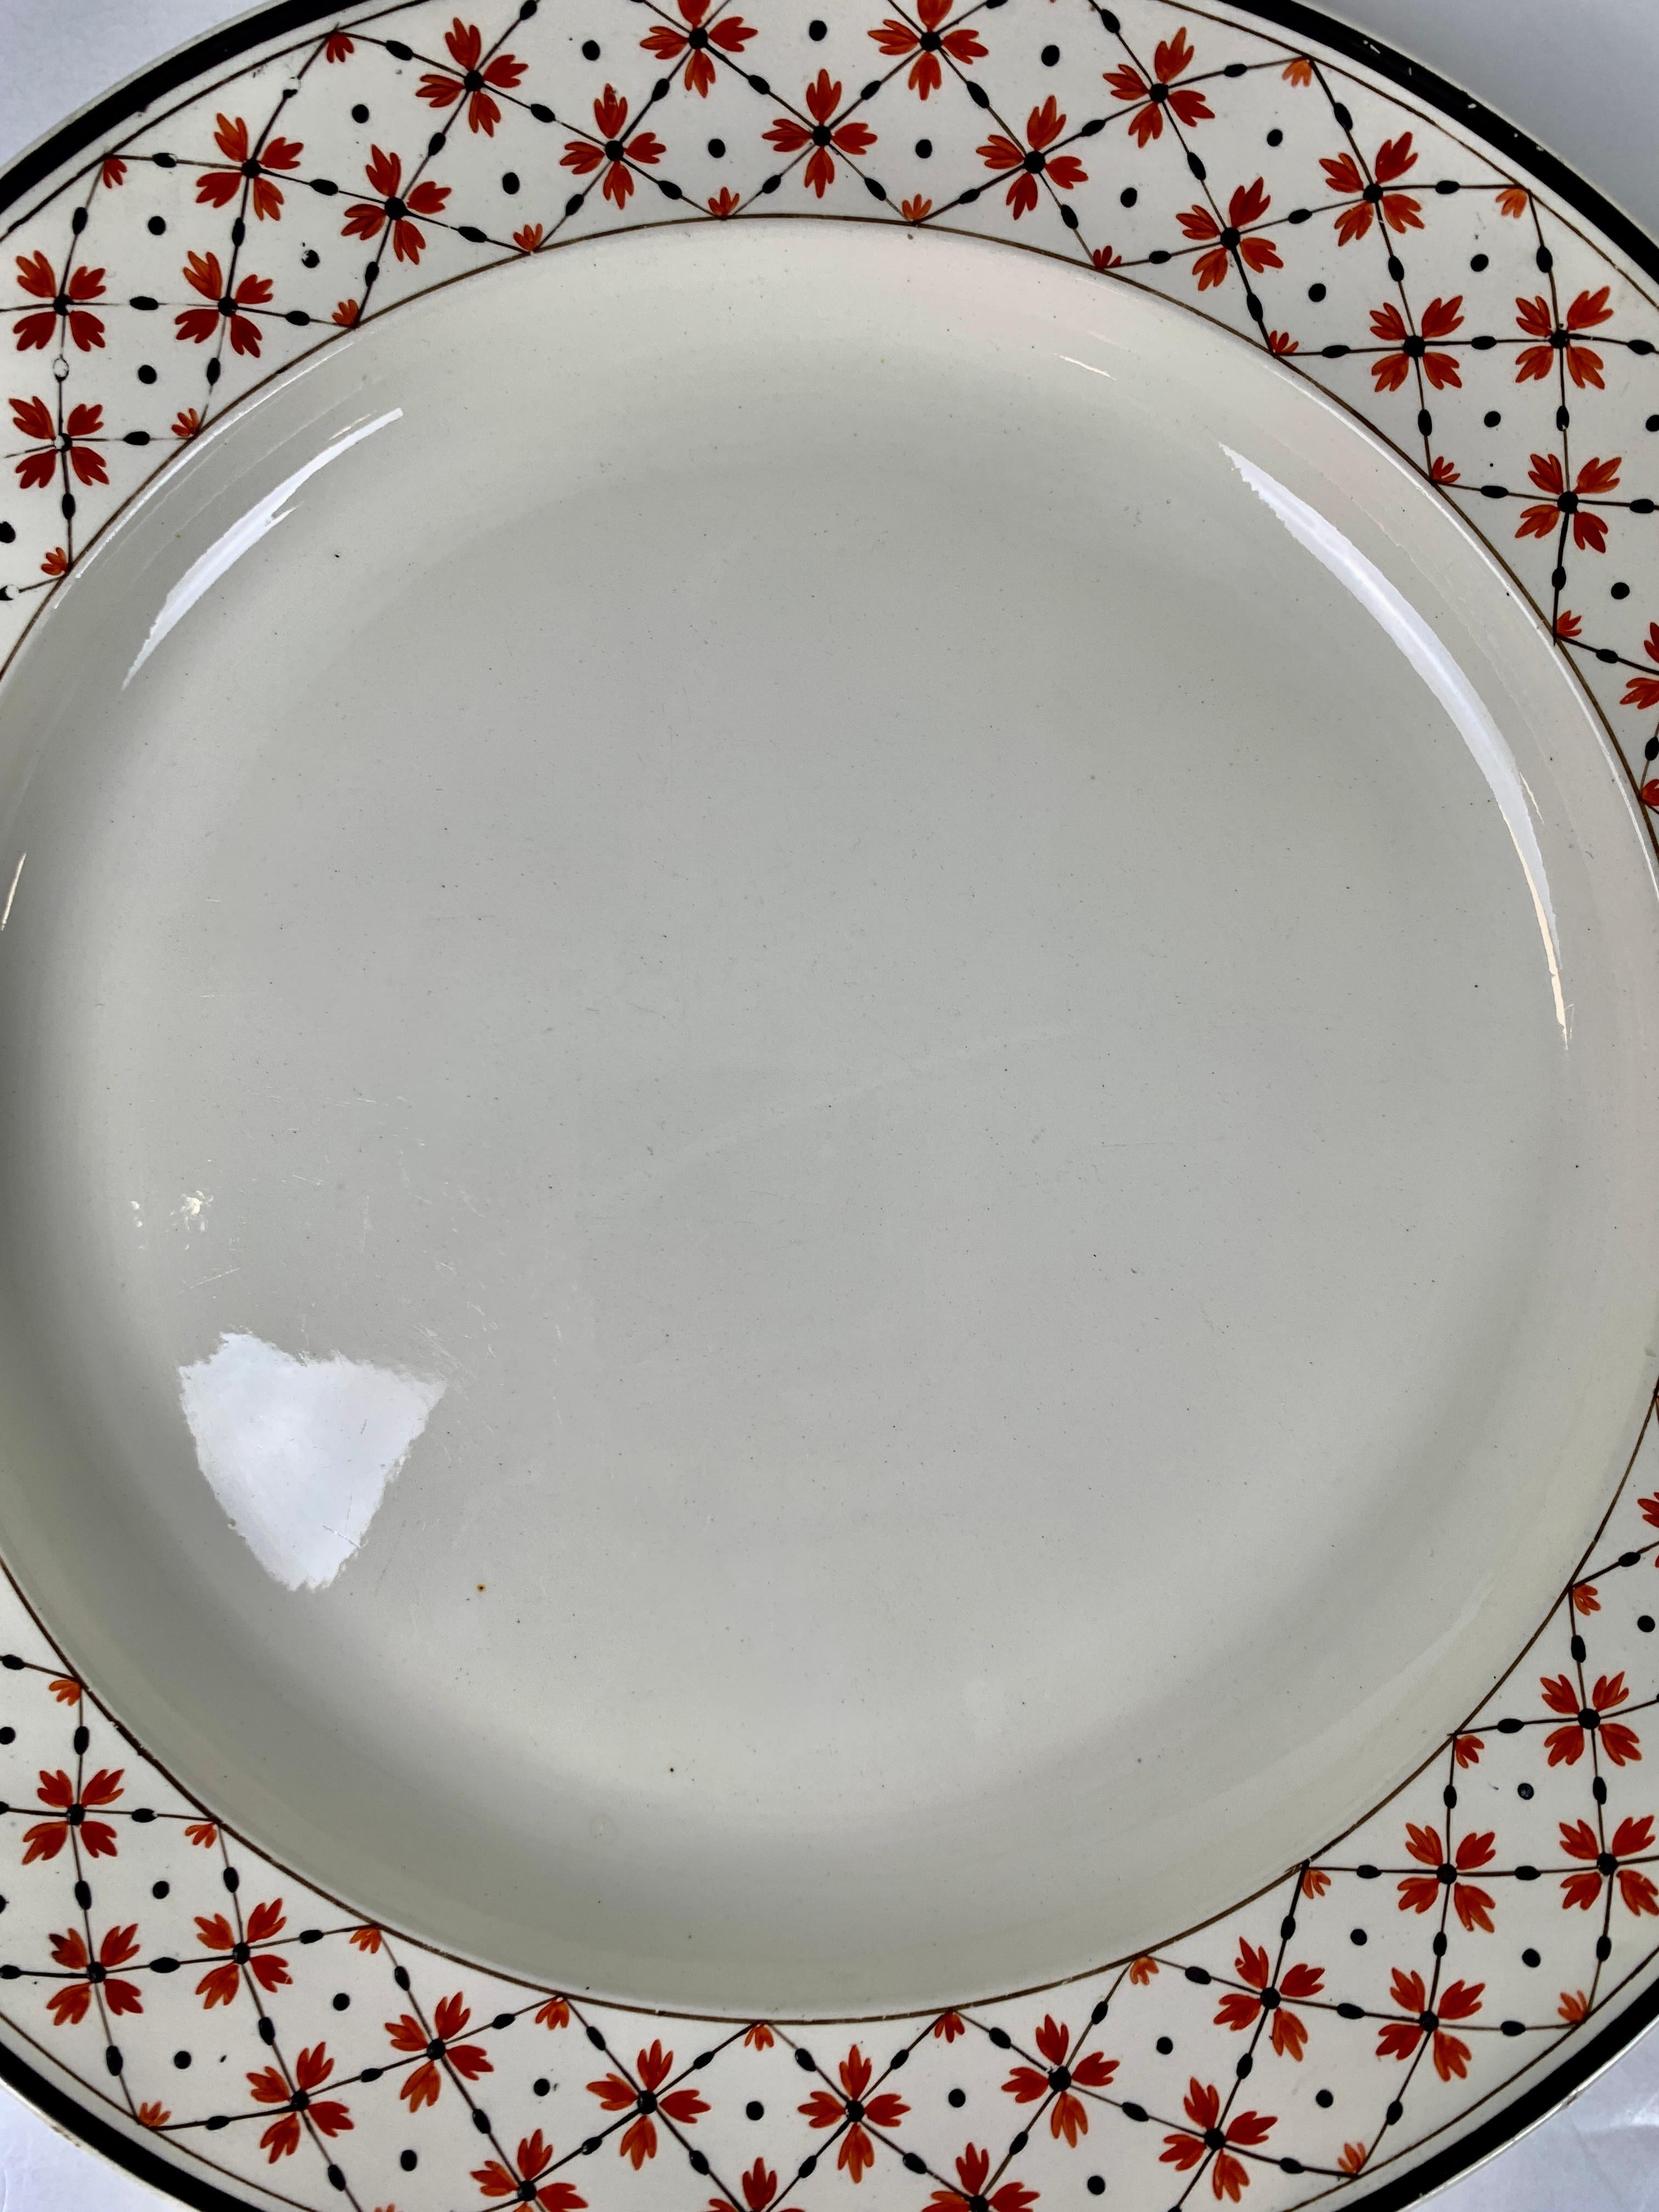 Wedgwood Creamware Platter or Charger 18th Century Made in England Circa 1785 For Sale 1